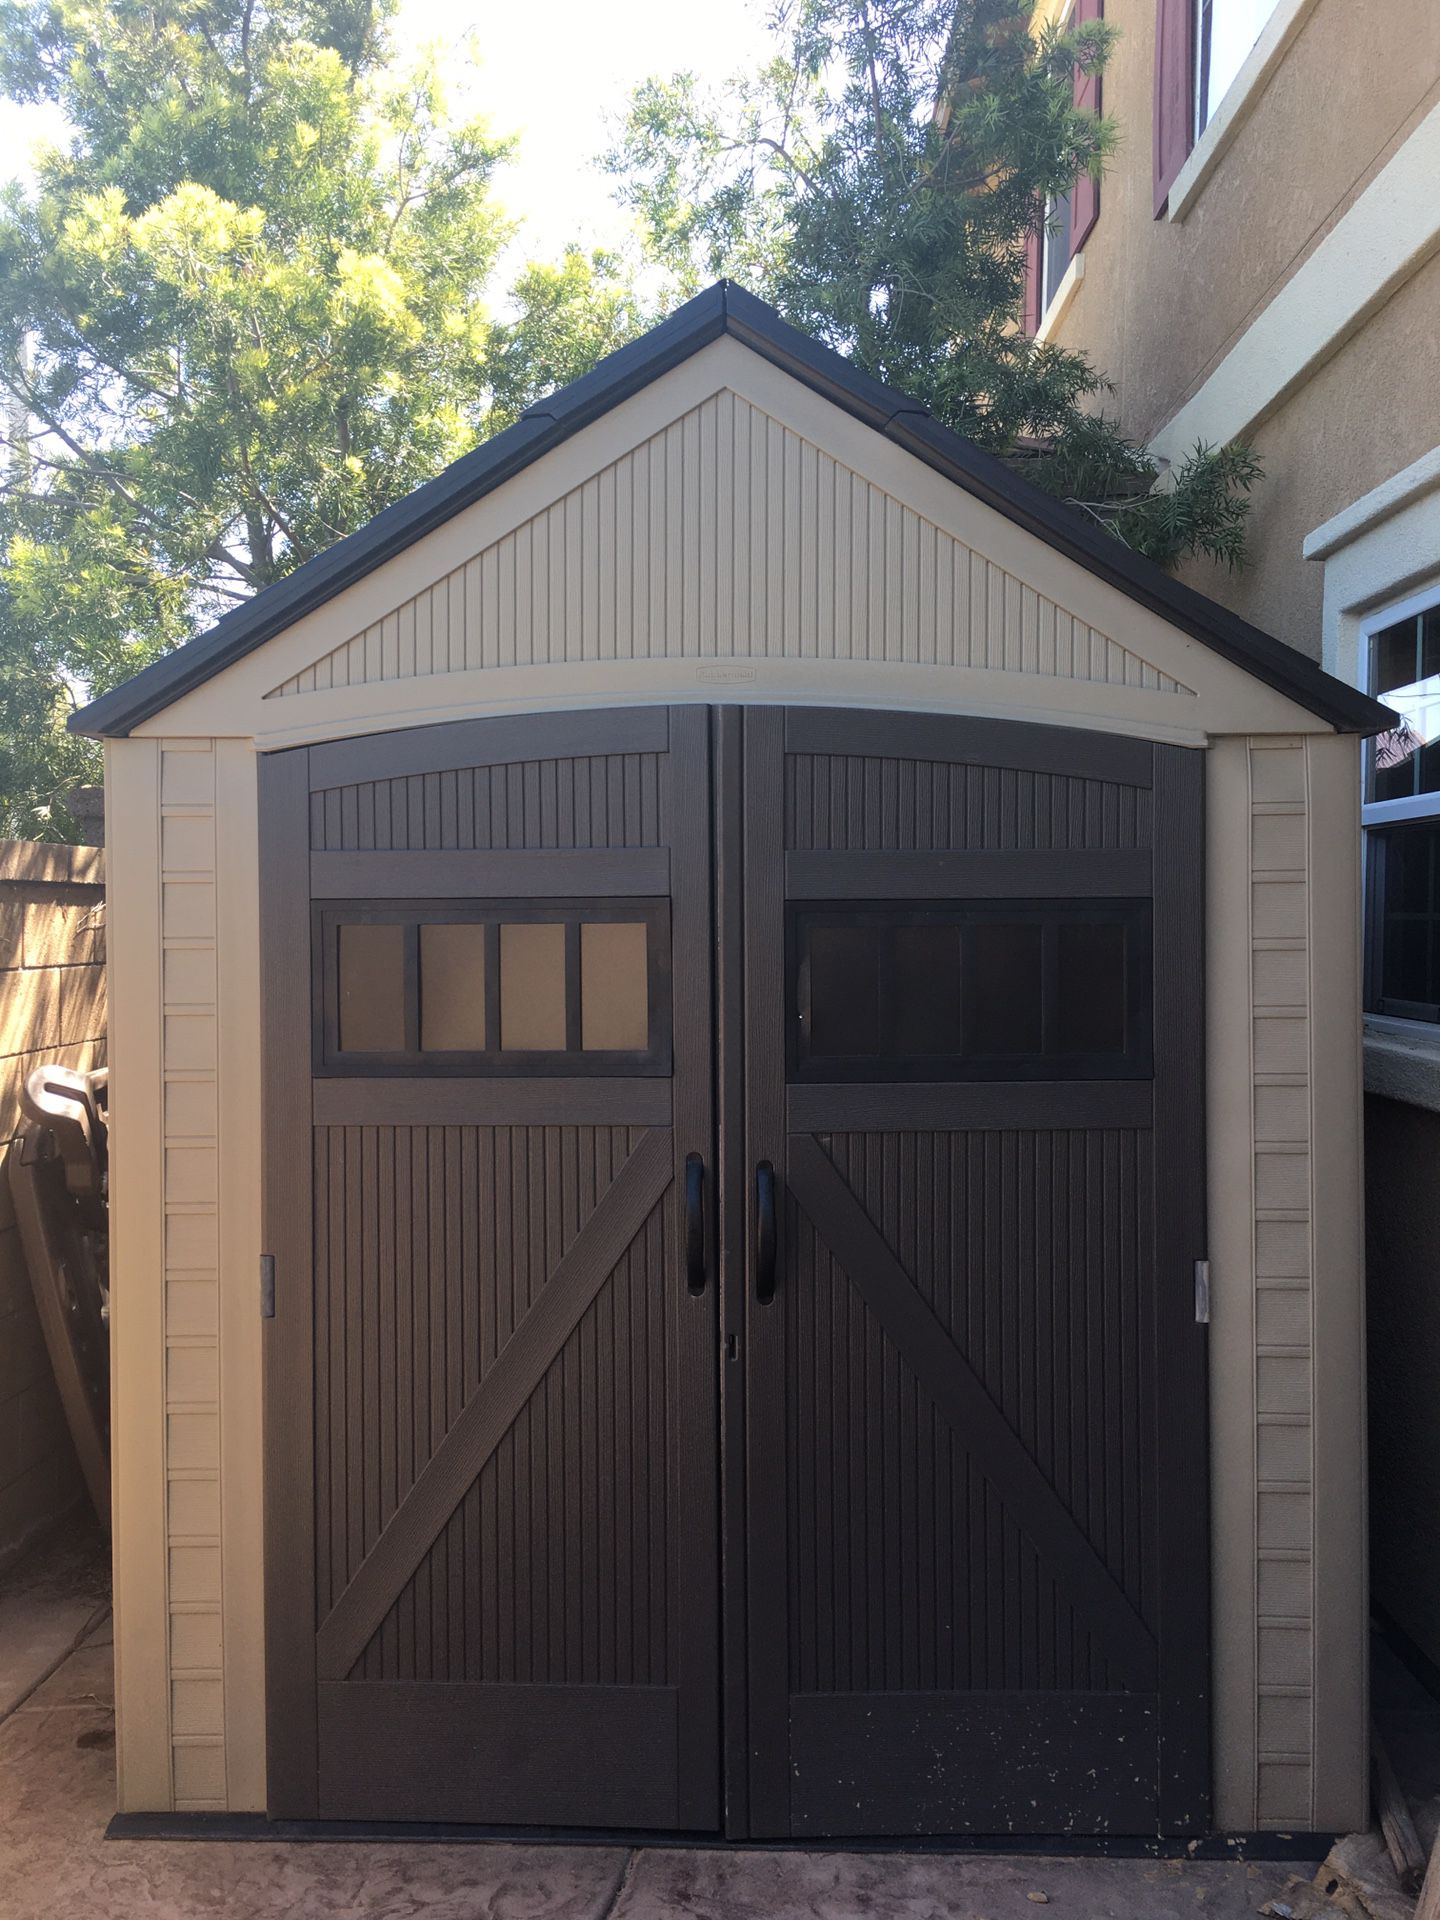 Rubbermaid roughneck 7x7 storage shed